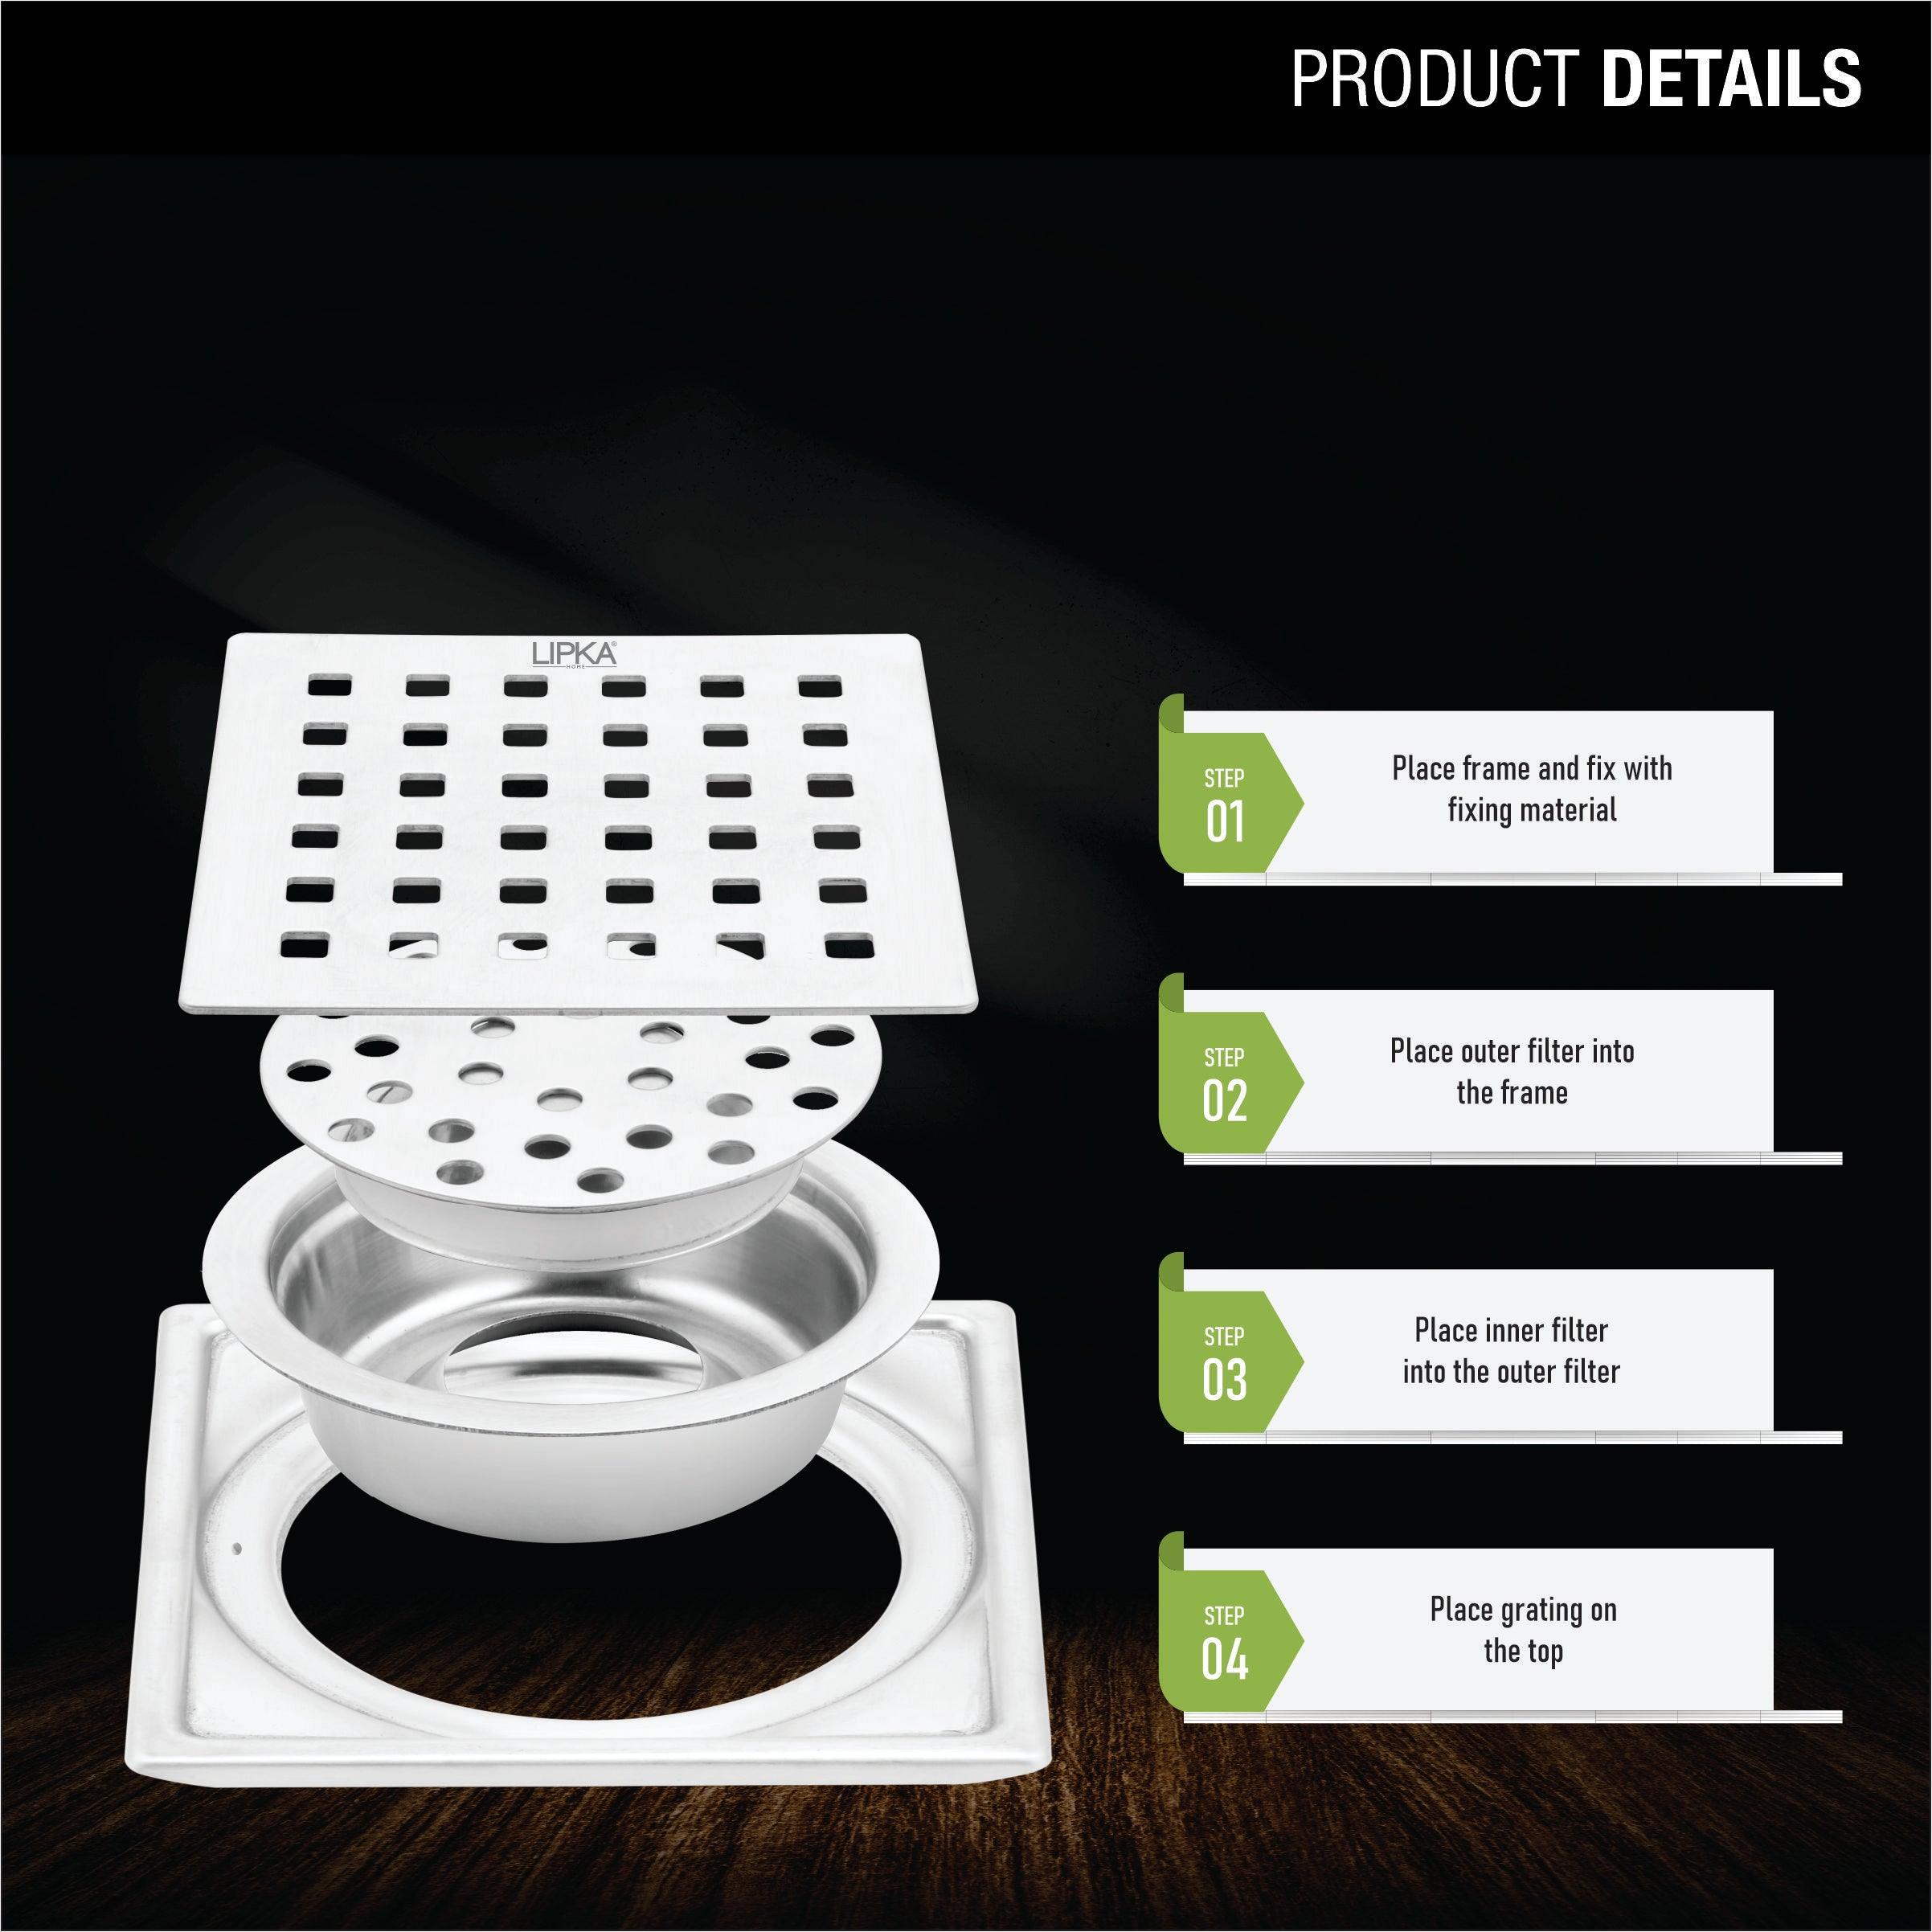 Red Exclusive Square Floor Drain (6 x 6 Inches) with Cockroach Trap product details